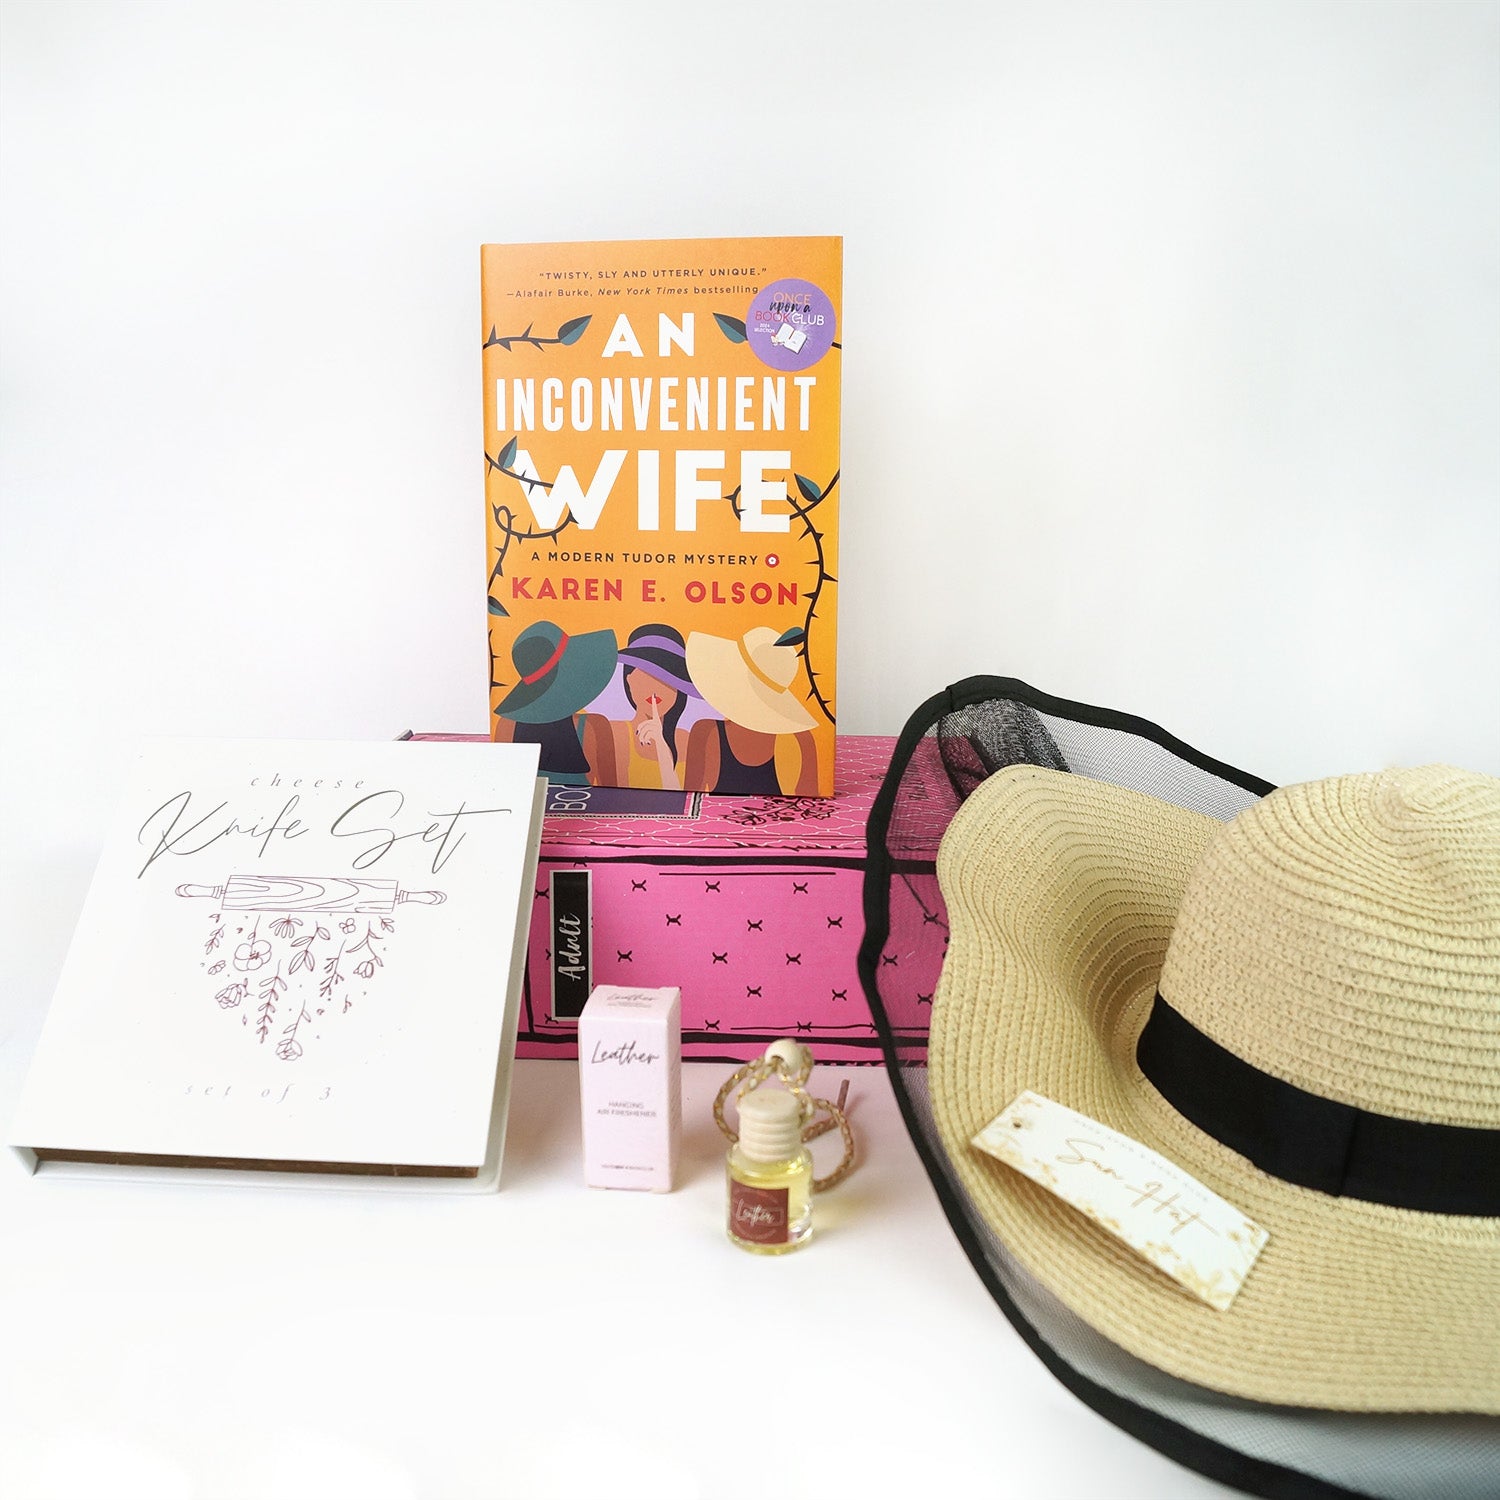 A hardcover edition of An Inconvenient Wife by Karen E Olson stands on a pink Once Upon a Book Club box. In front of the box are a white box labeled Knife Set, a box labeled car air freshener next to a small container, and a beige sunhat with black trim.